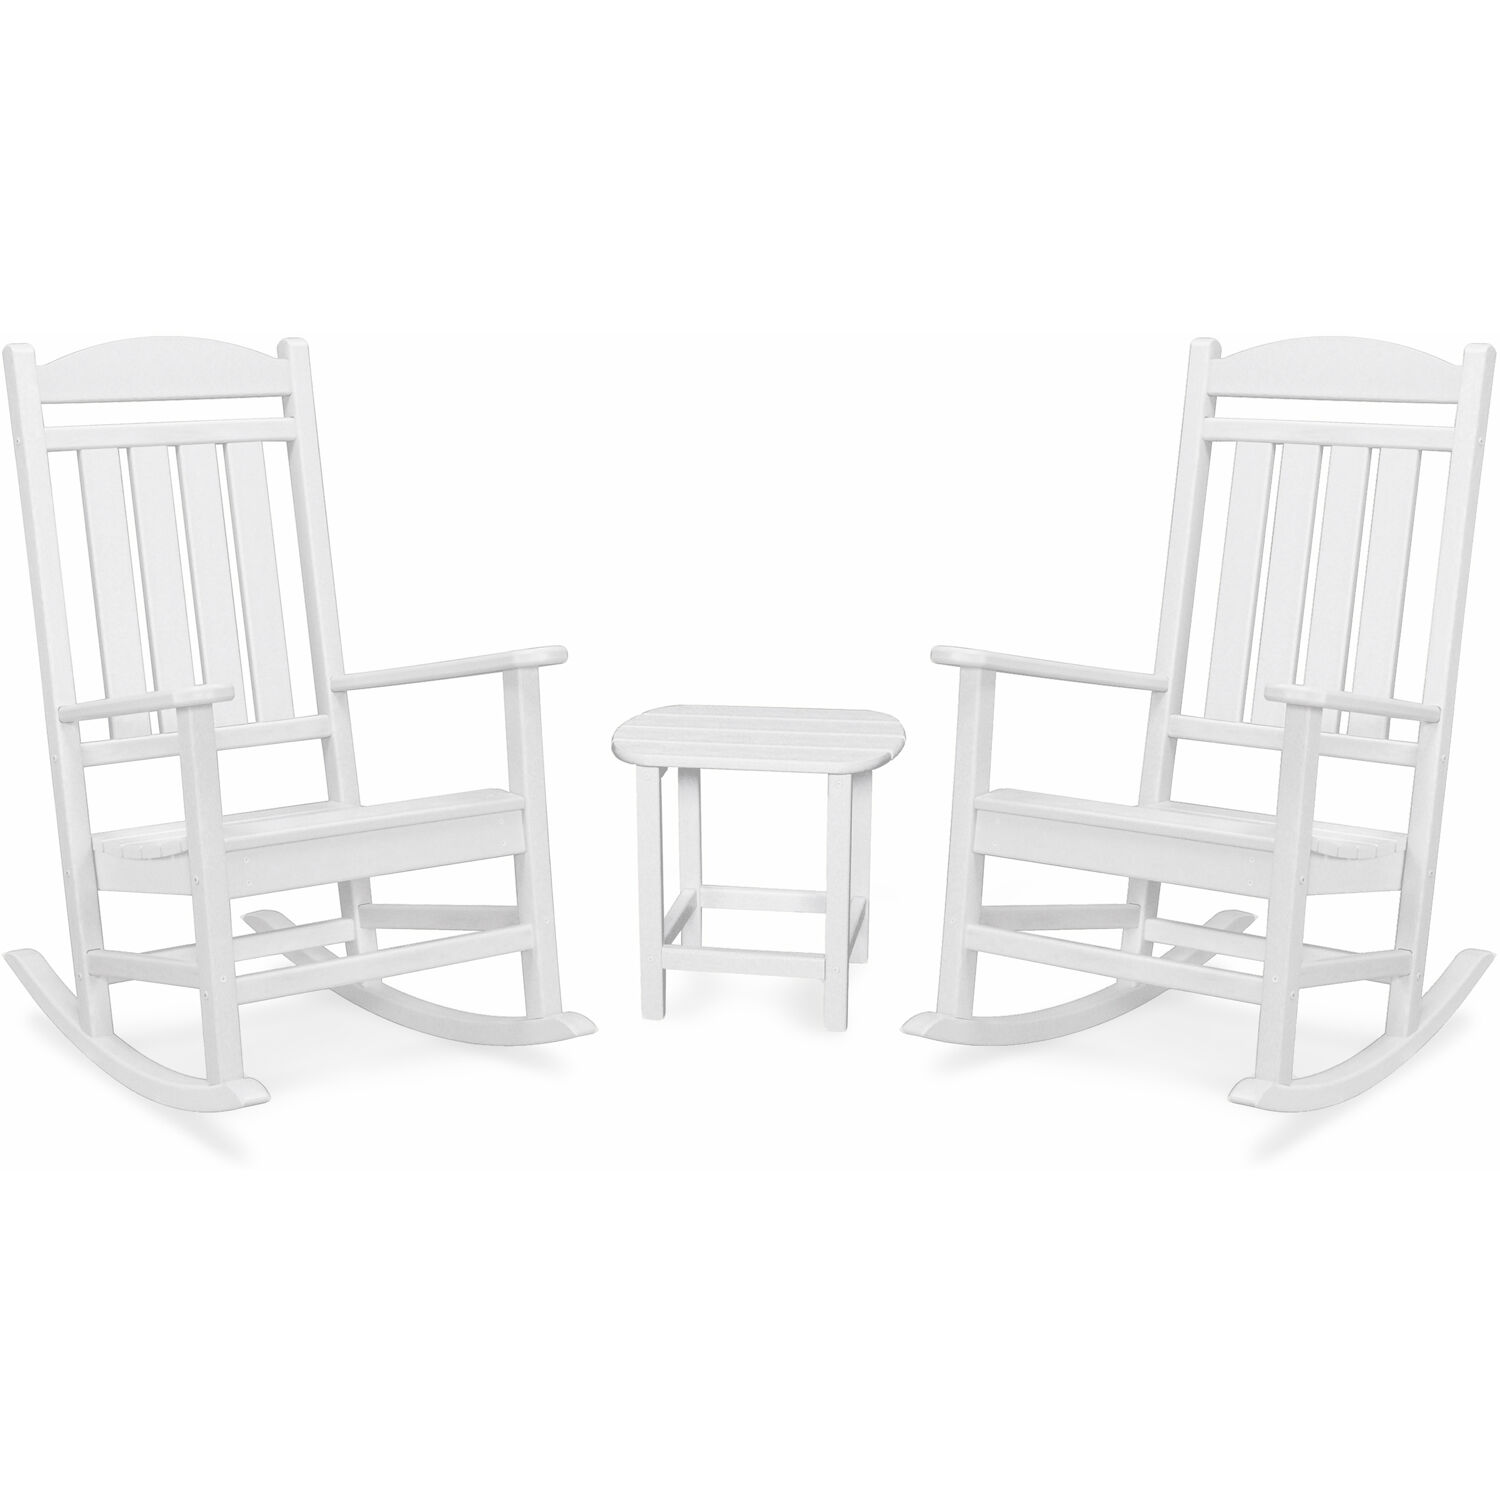 Hanover Pineapple Cay All-Weather 3-Piece Outdoor Patio Porch Rocker Chat Set, 2 Rockers and Side Table, Eco-Friendly, Recycled Material, Made in USA - PINE3PC-WHT - image 1 of 5